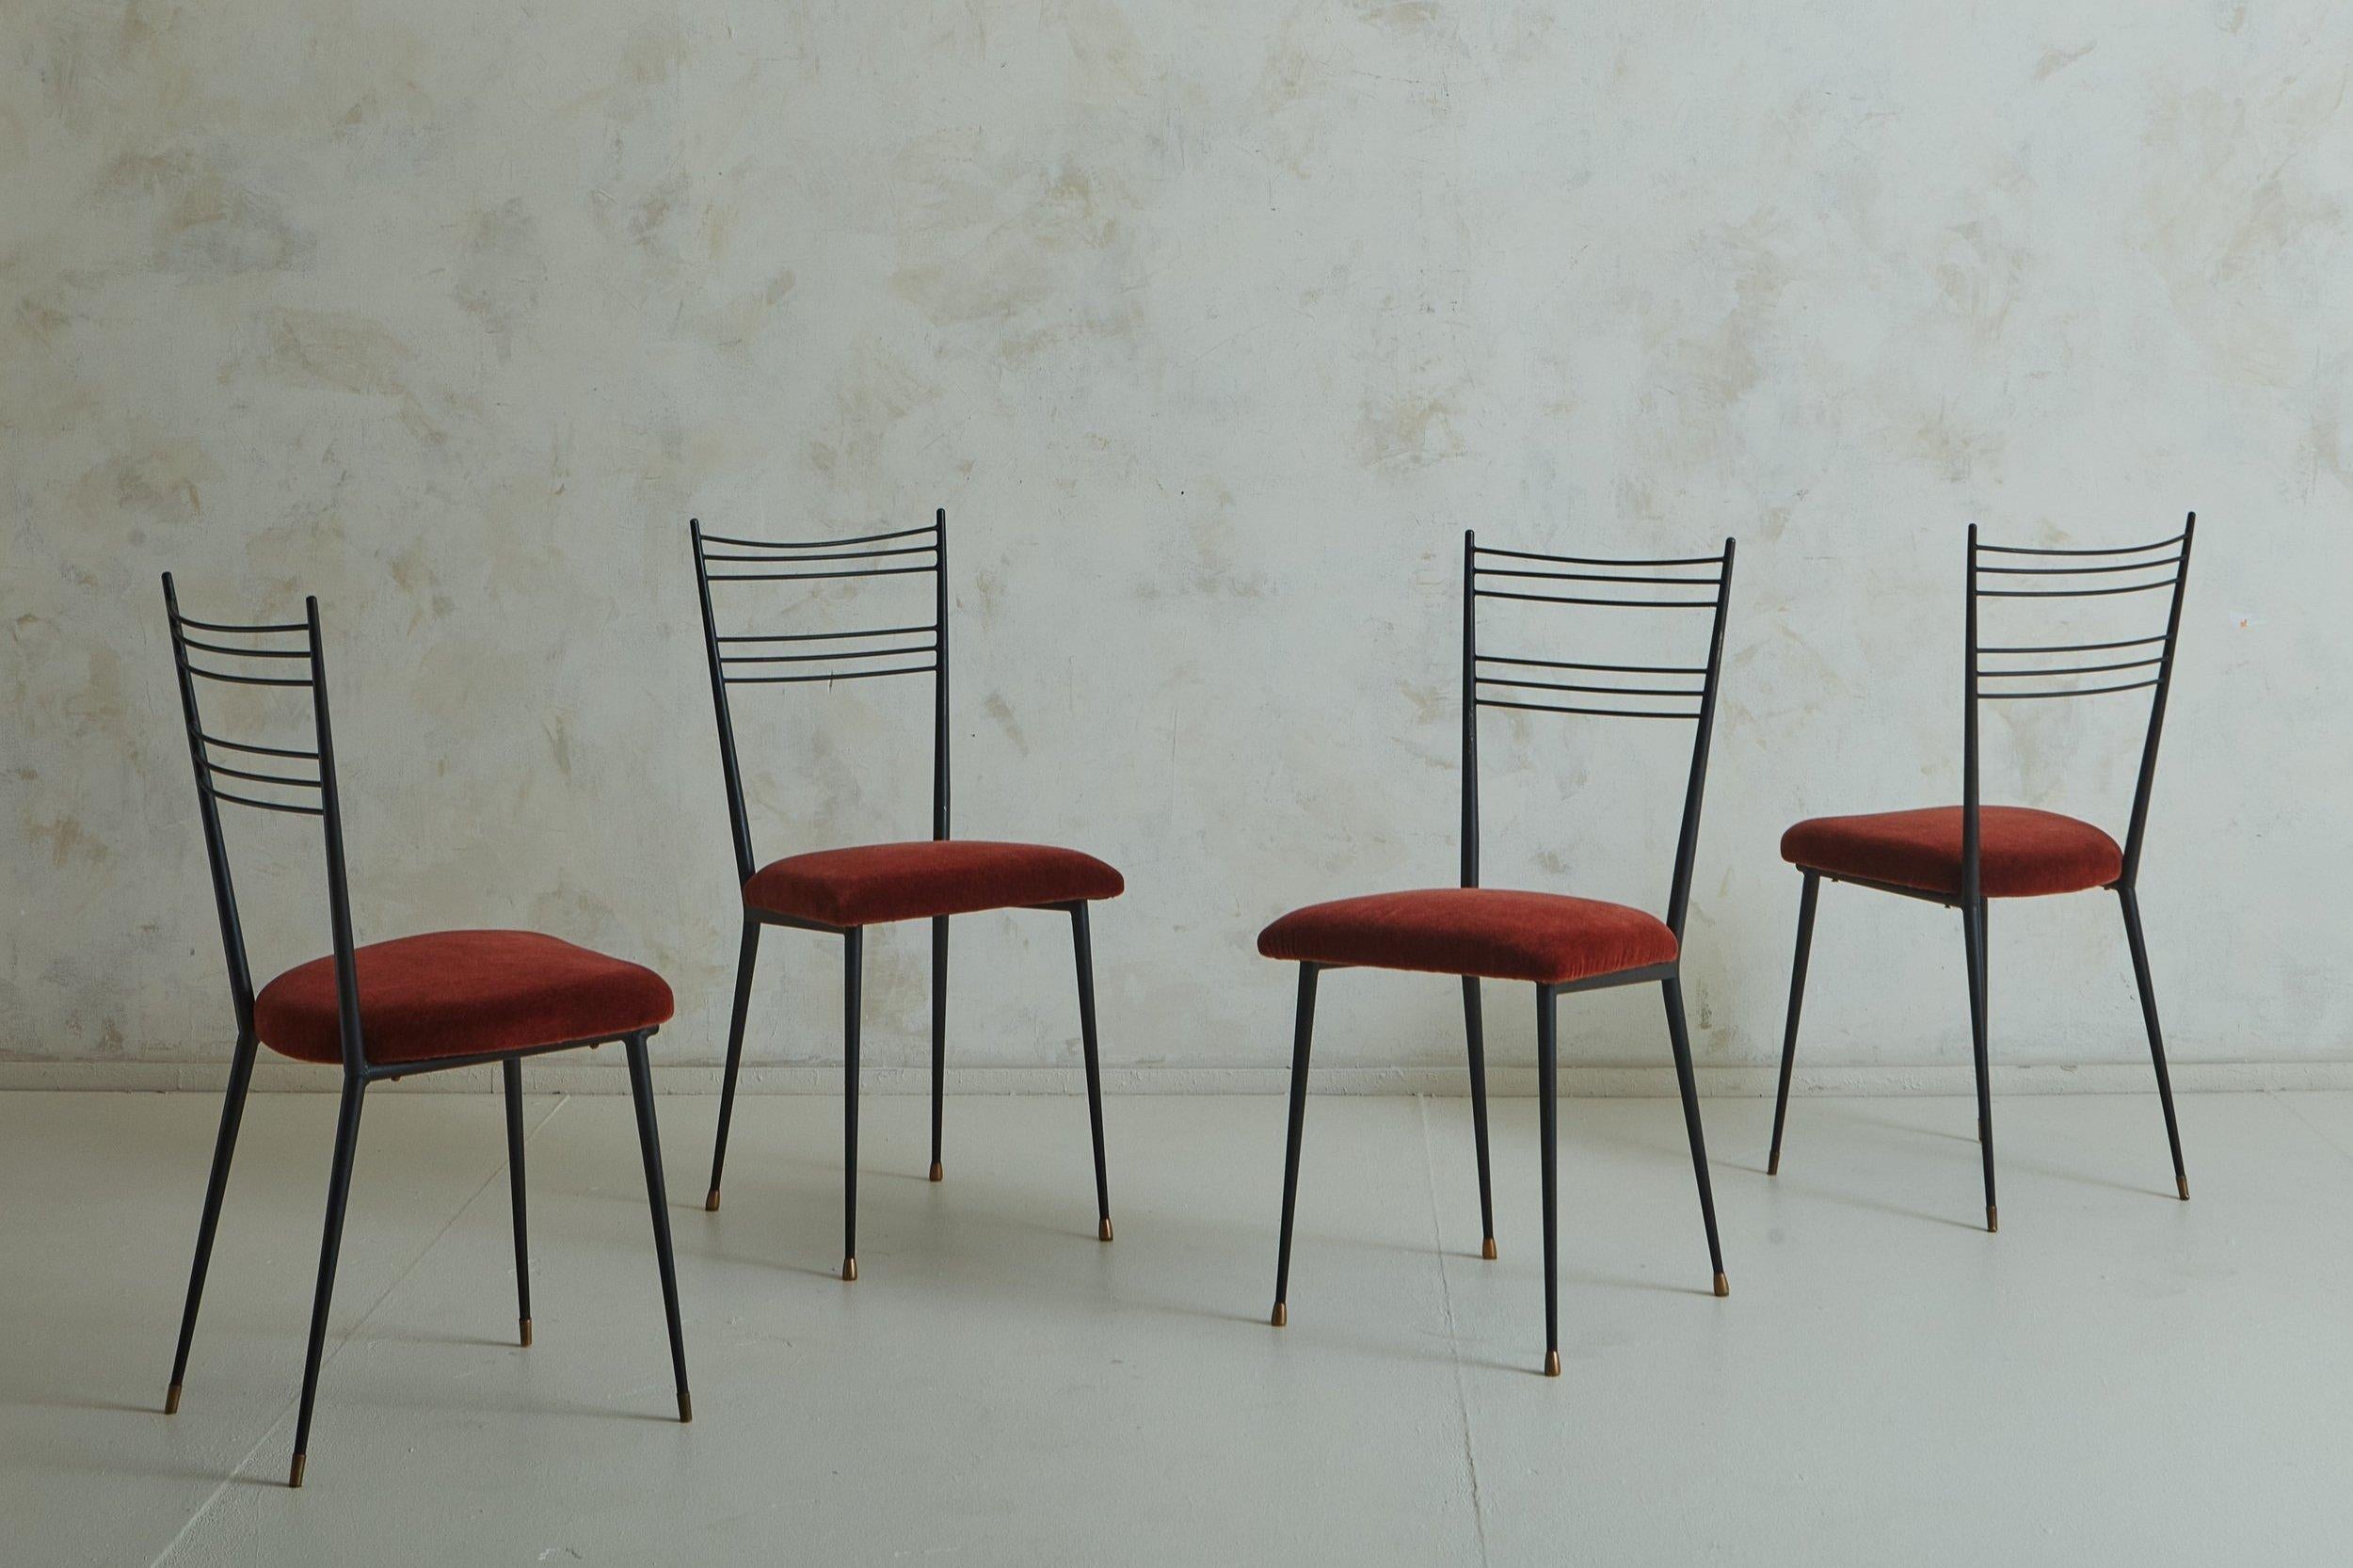 French Set of 4 Steel Dining Chairs in Rust Mohair Attributed to Colette Guedon For Sale